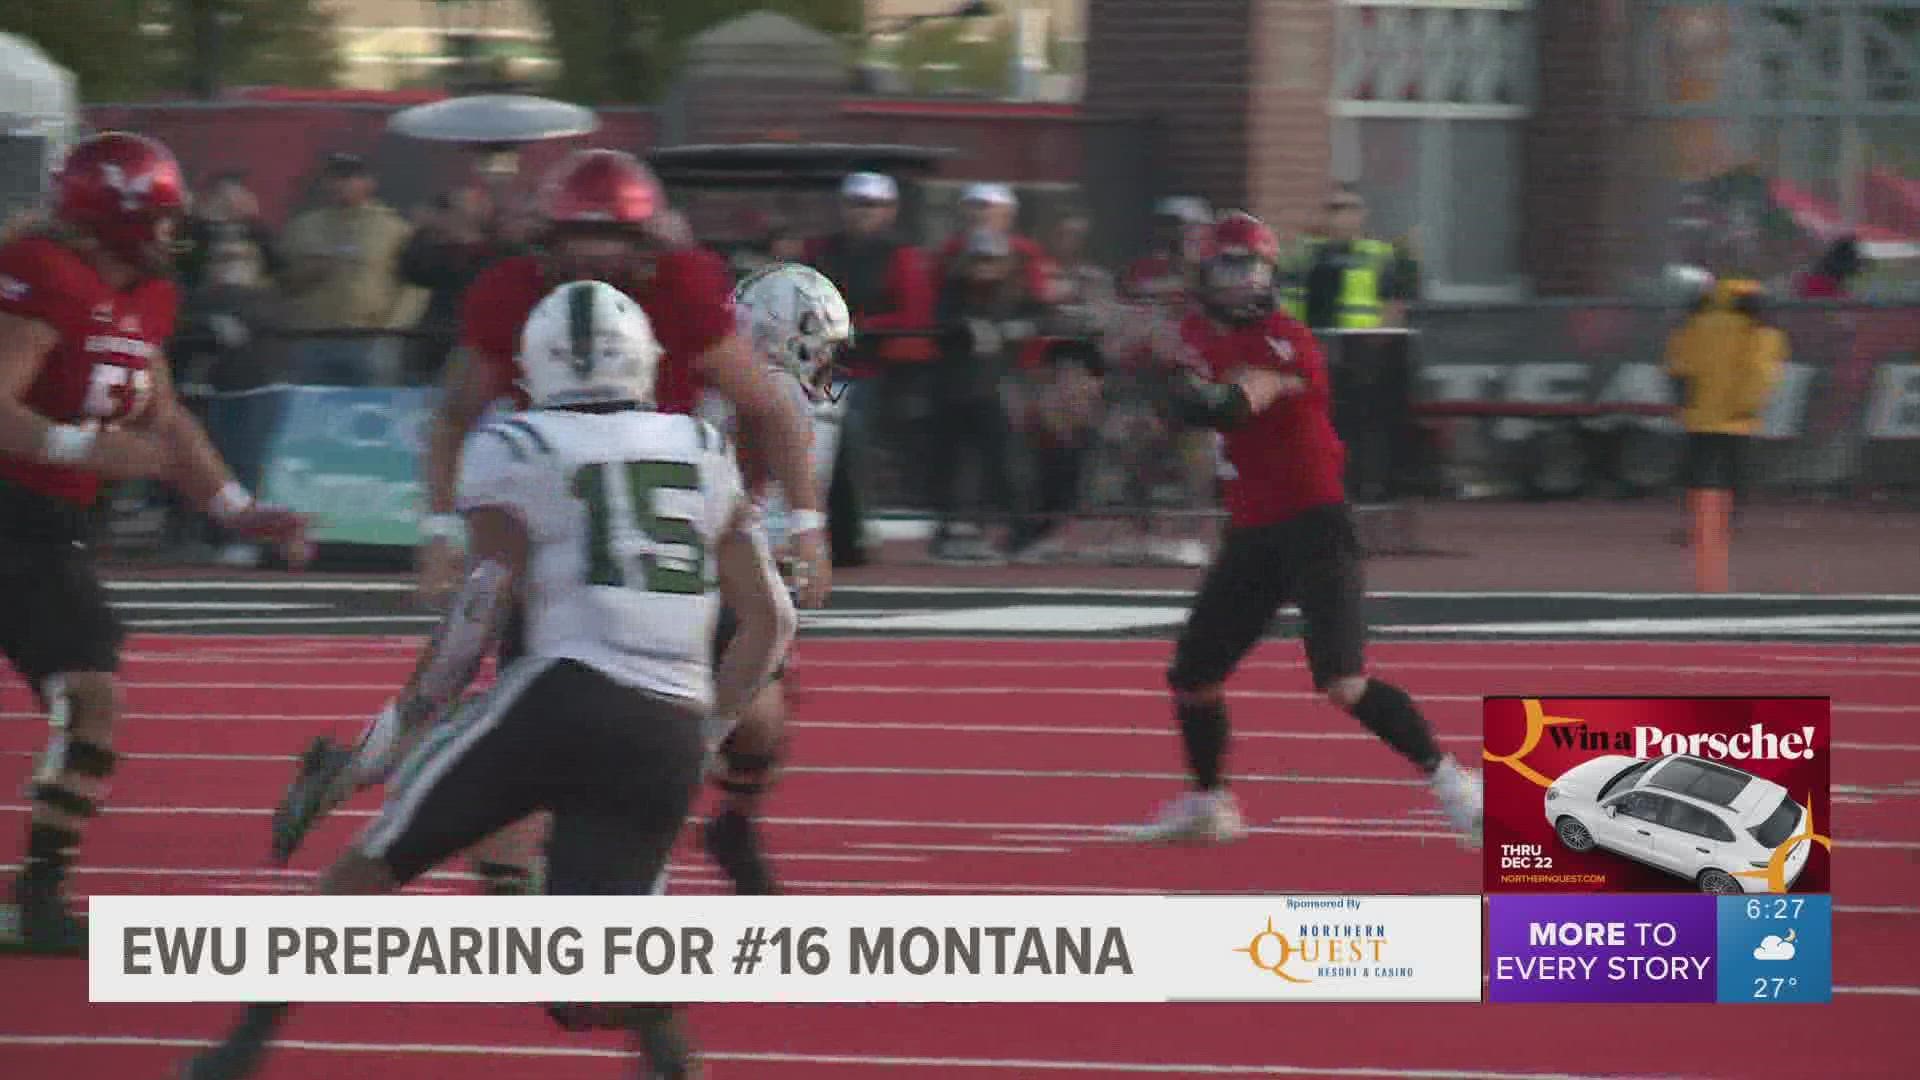 Eastern Washington is set to face No. 16 Montana in Missoula on Saturday. The Eags are looking for revenge of sorts after Montana ended their 2021-22 season.